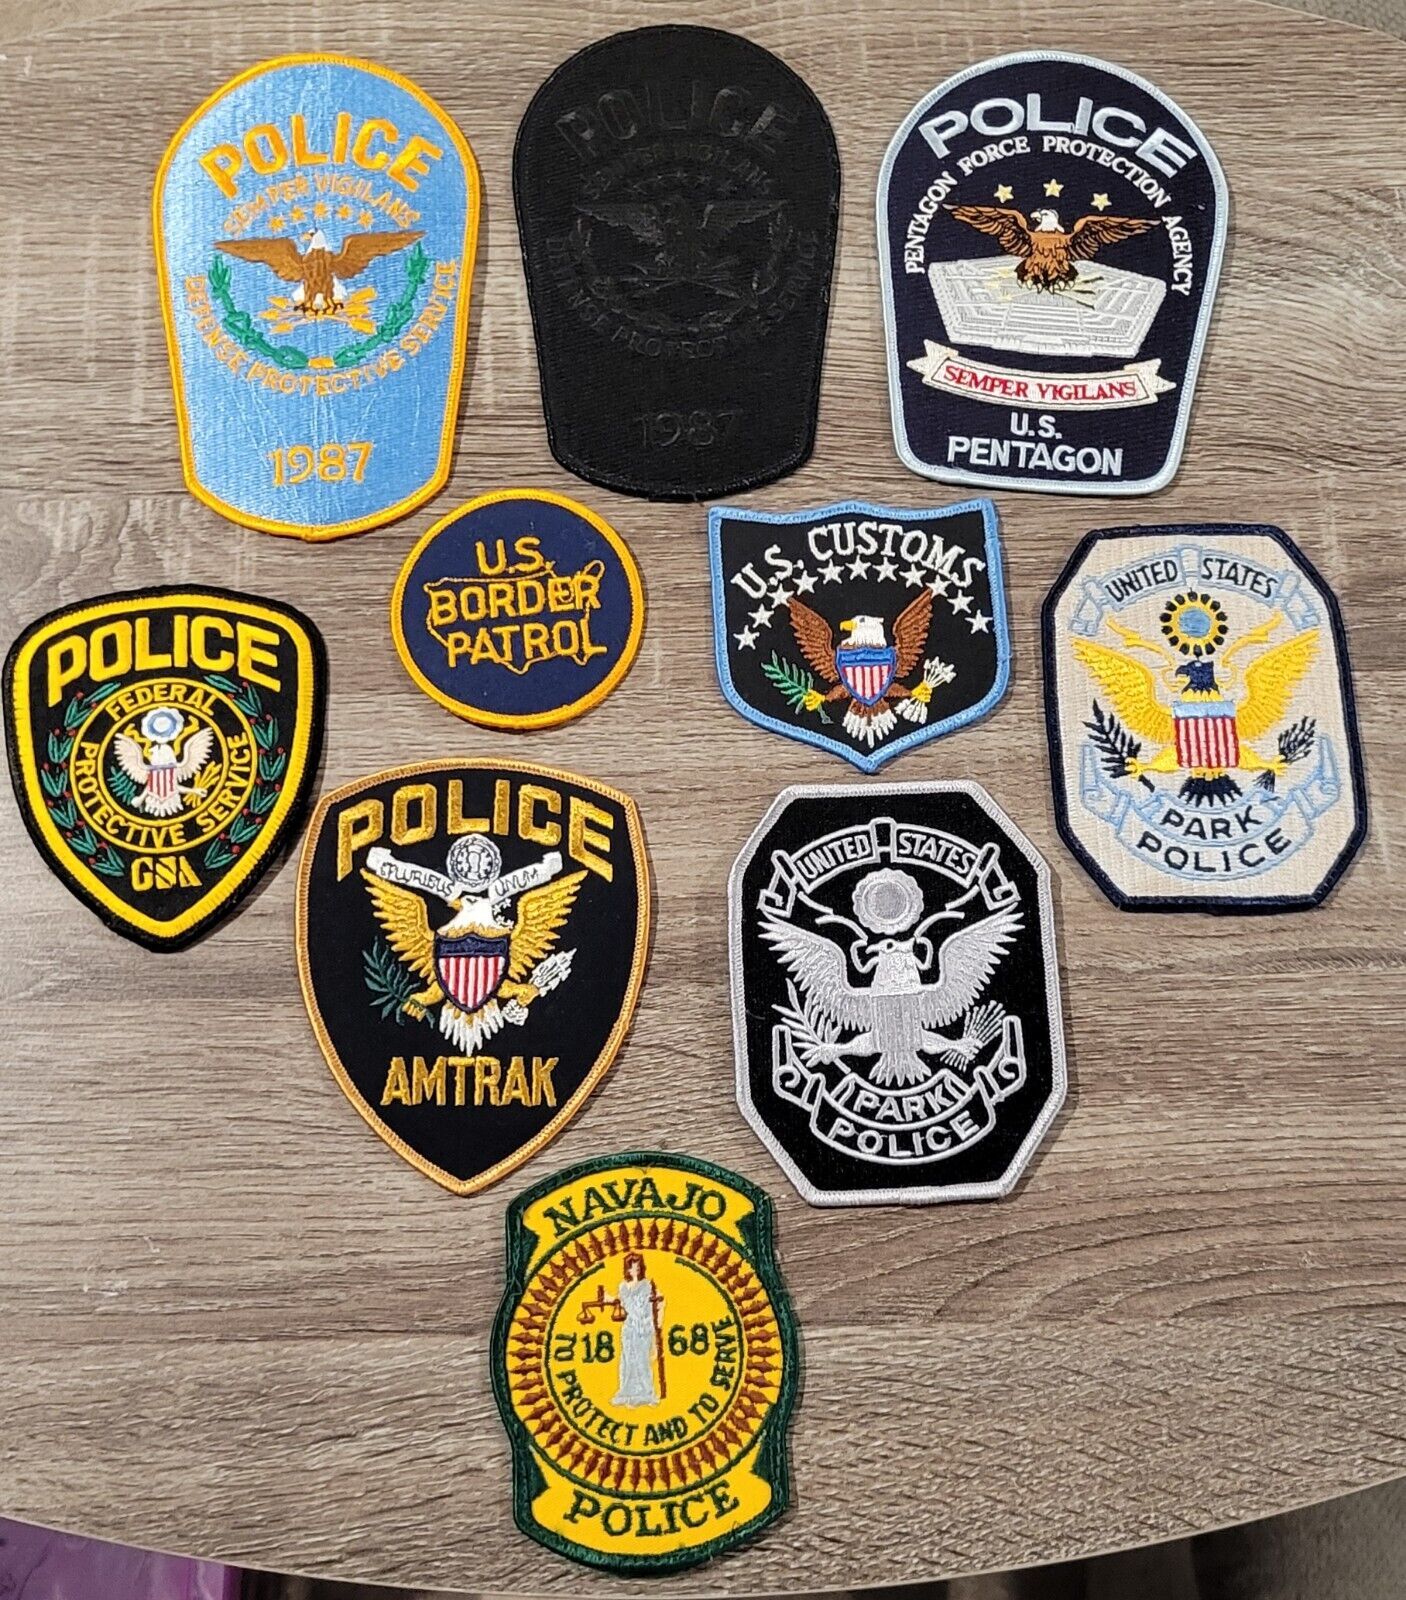 LOT OF 10 FEDERAL POLICE SHOULDER PATCHES *SEE DESCRIPTION*